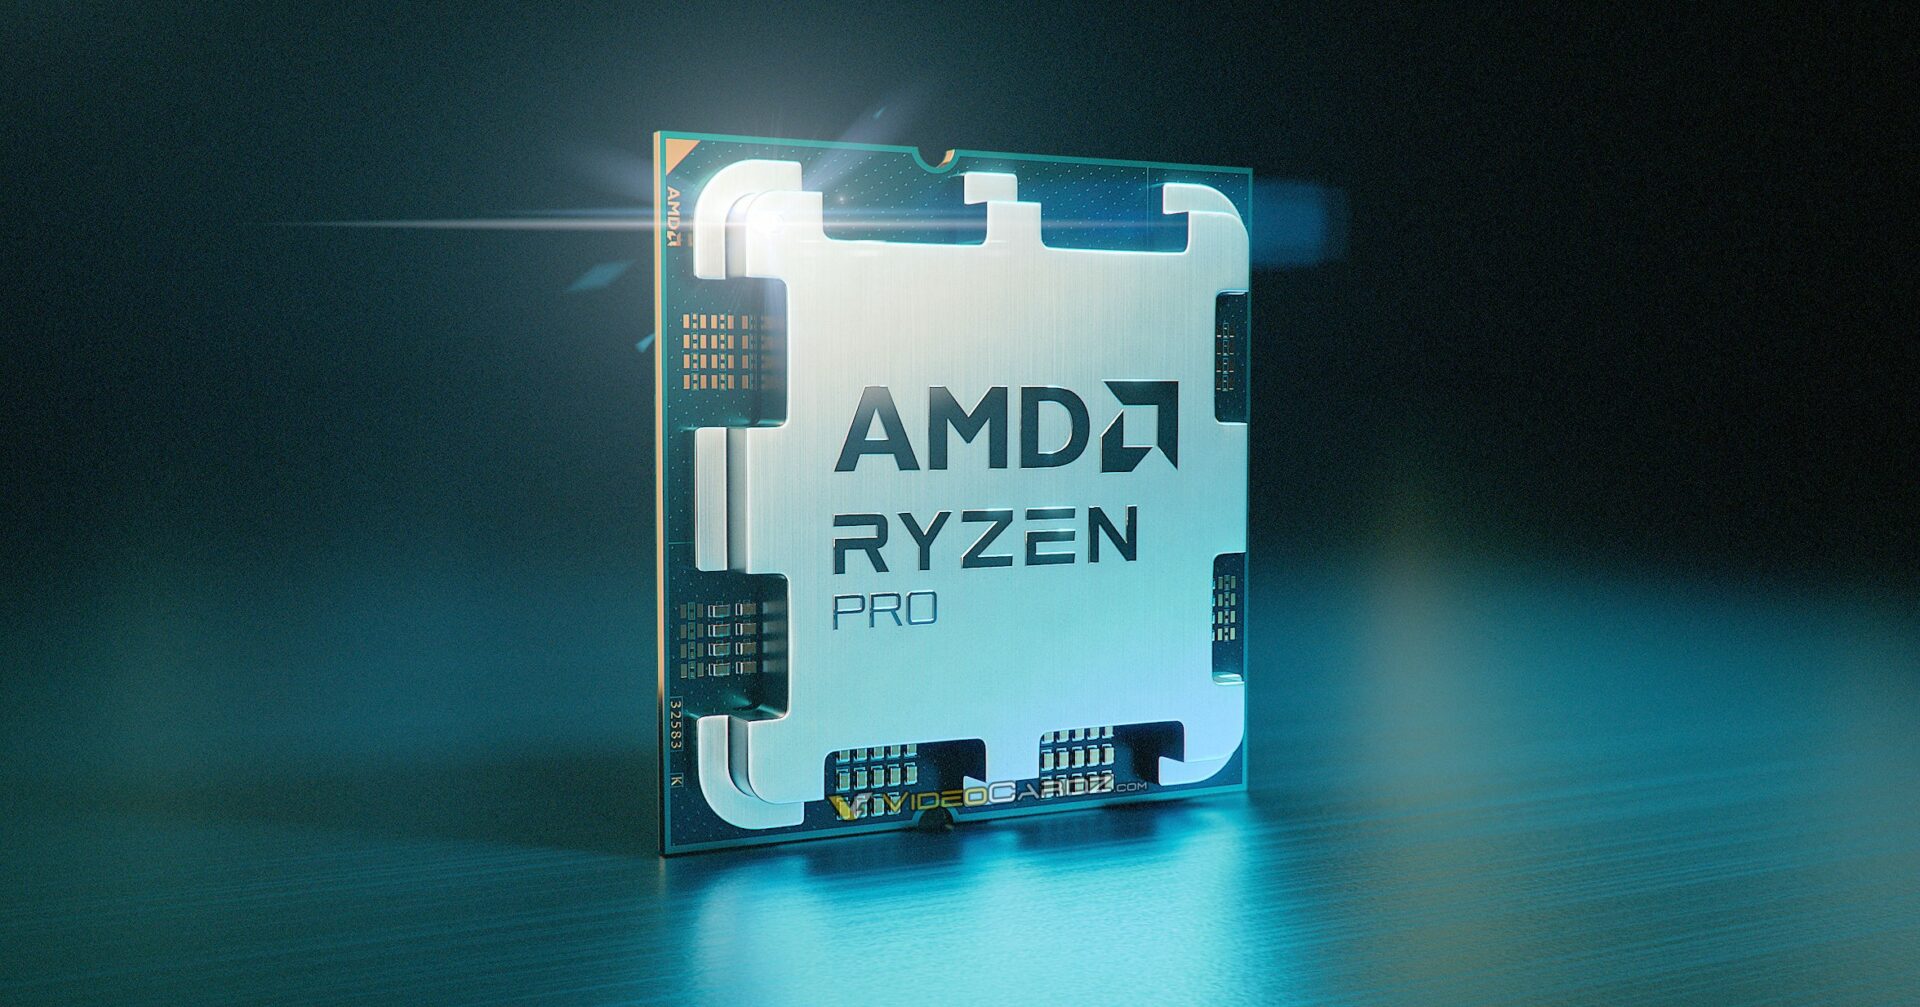 AMD debuts Ryzen Pro 7000 Series for professional use